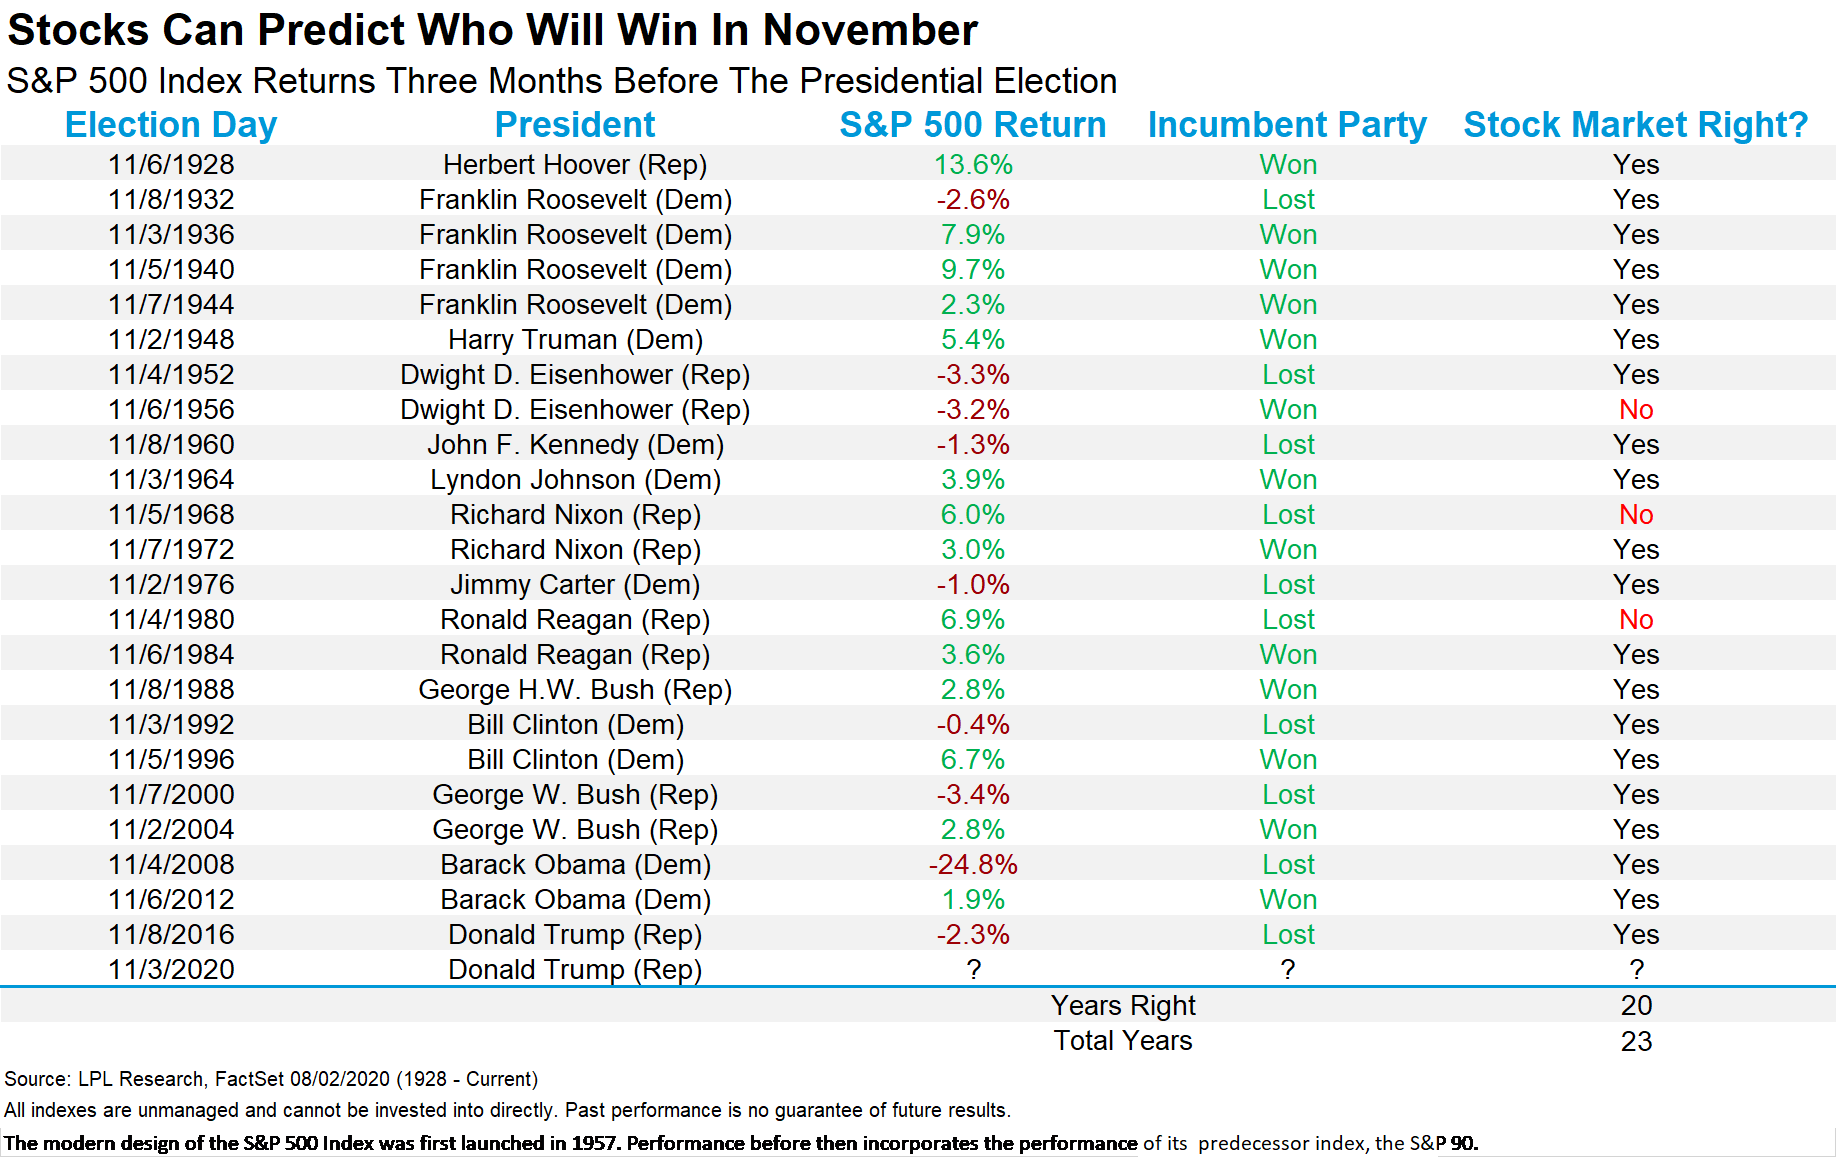 Market chart suggesting stocks may predict who will win the US elections. Published in September 2020 from FactSet